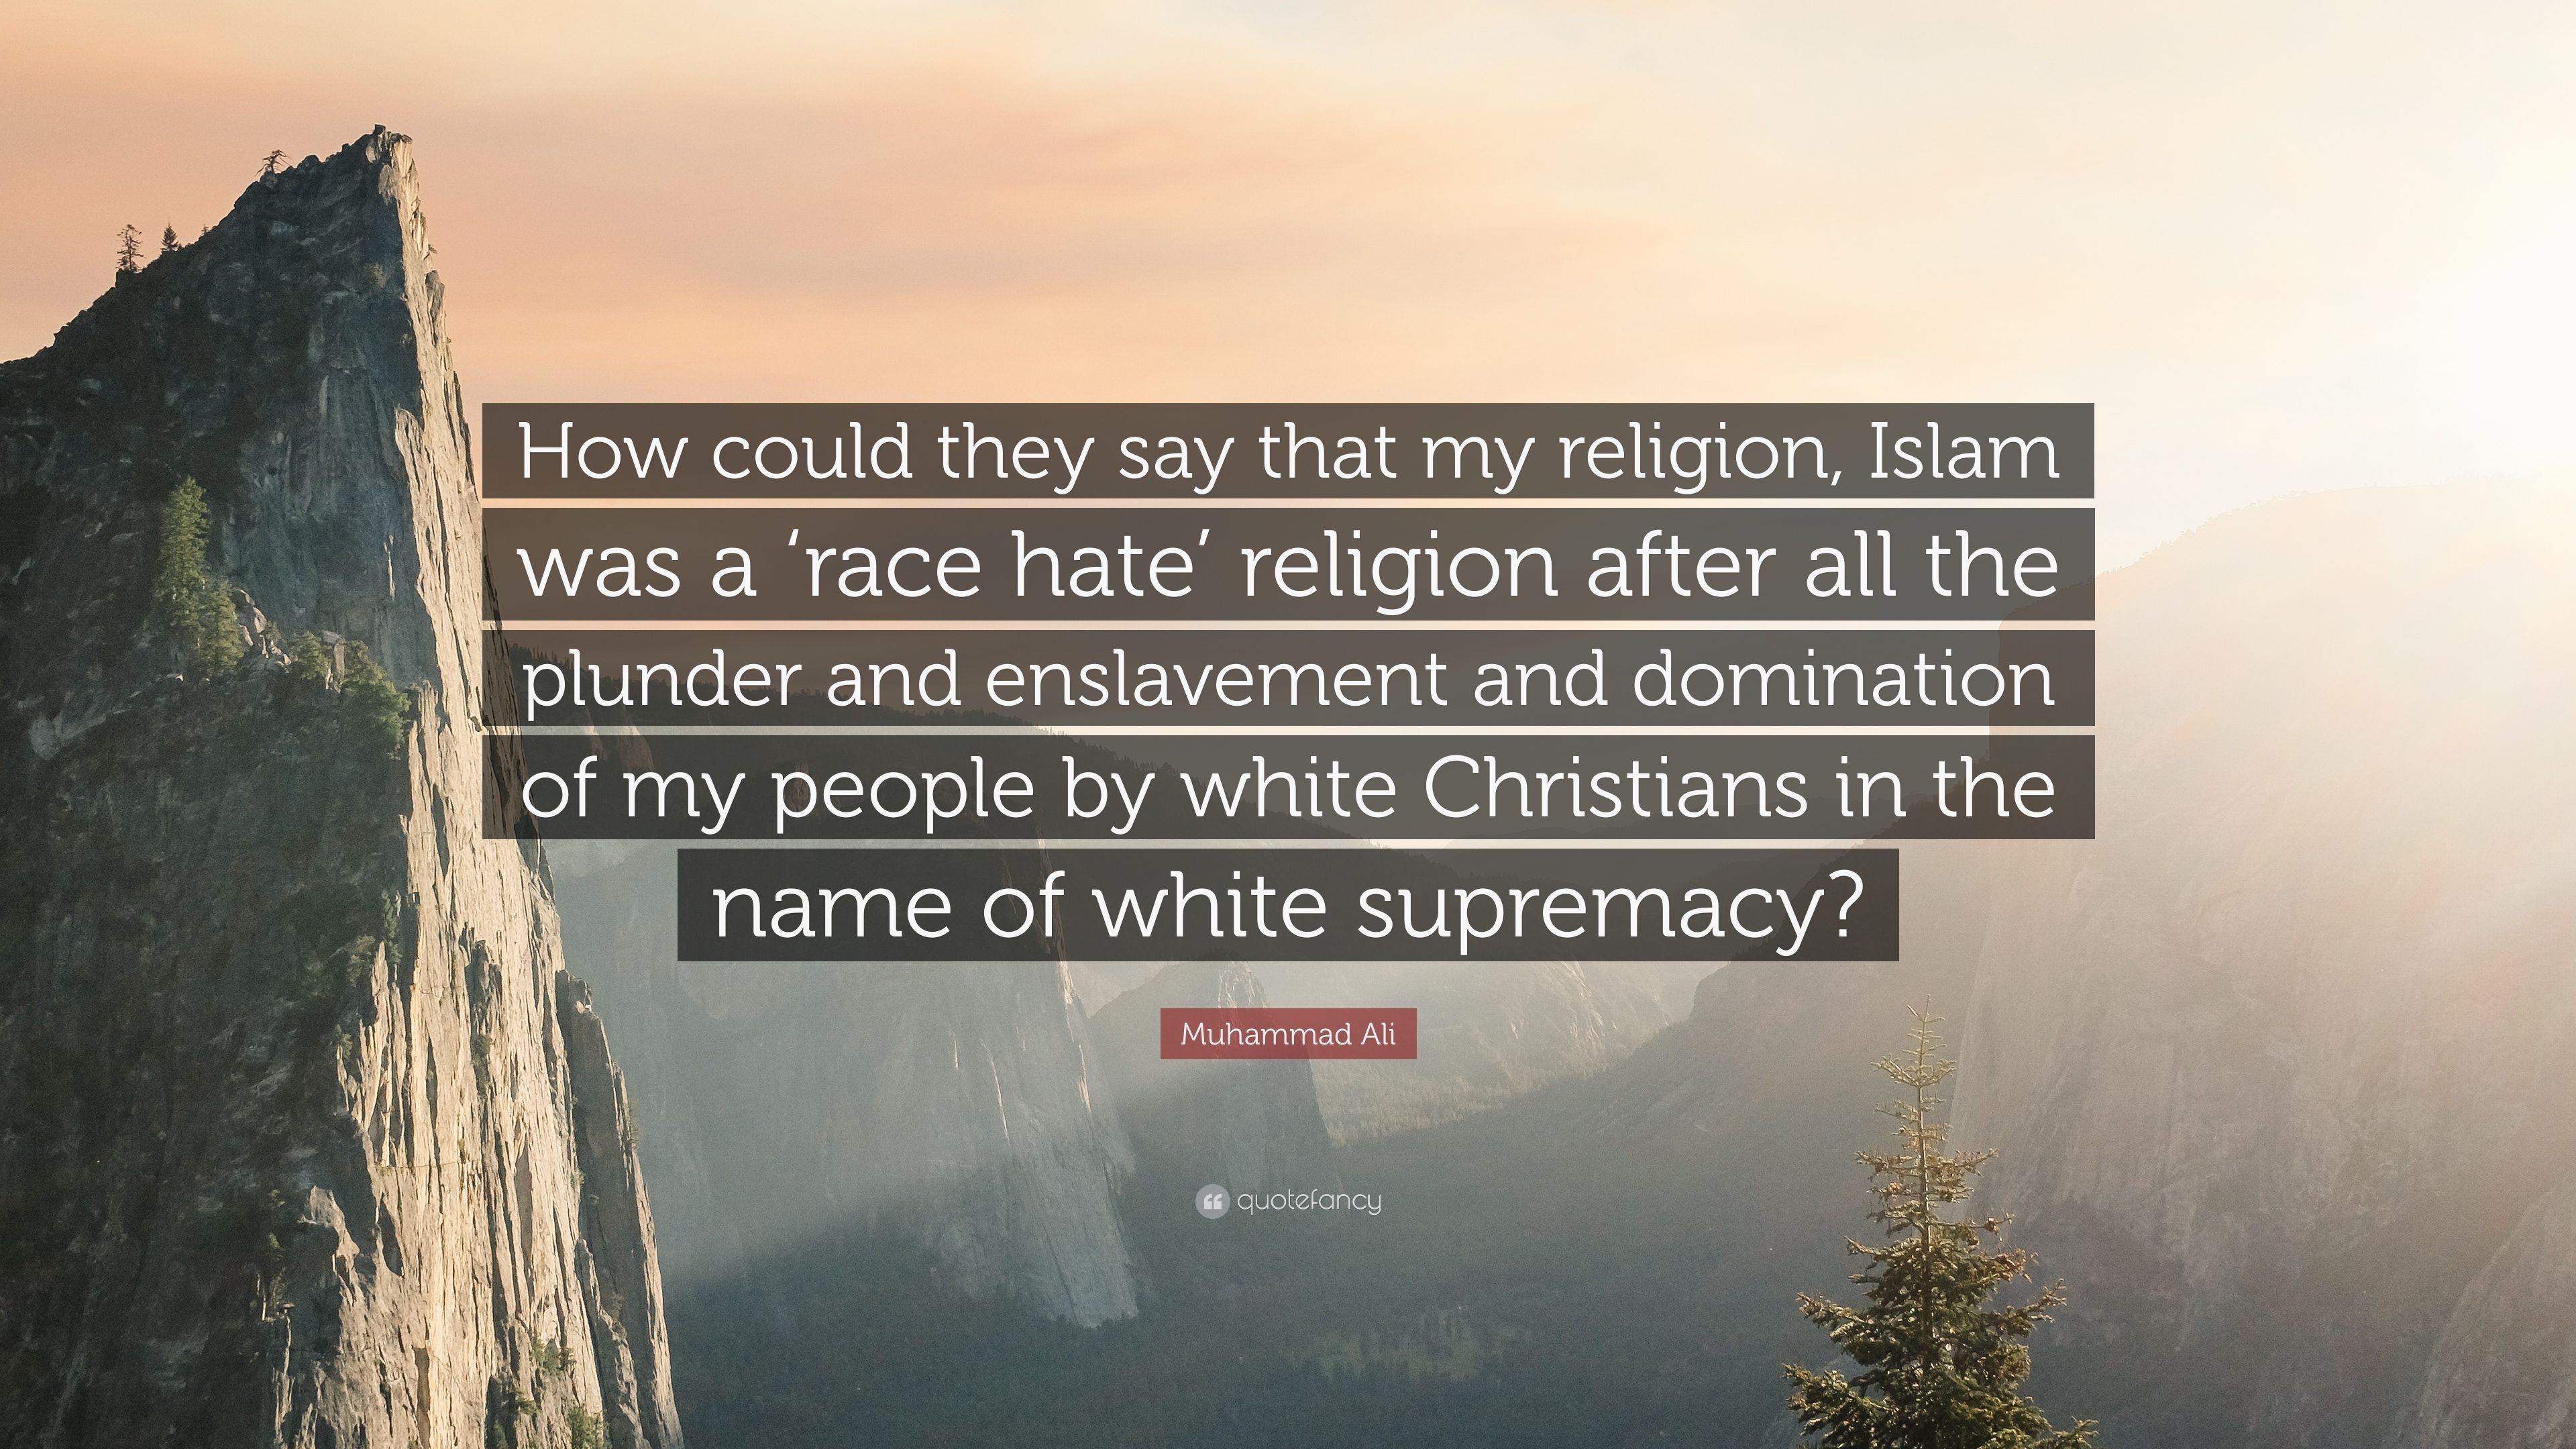 Muhammad Ali Quote: “How could they say that my religion, Islam